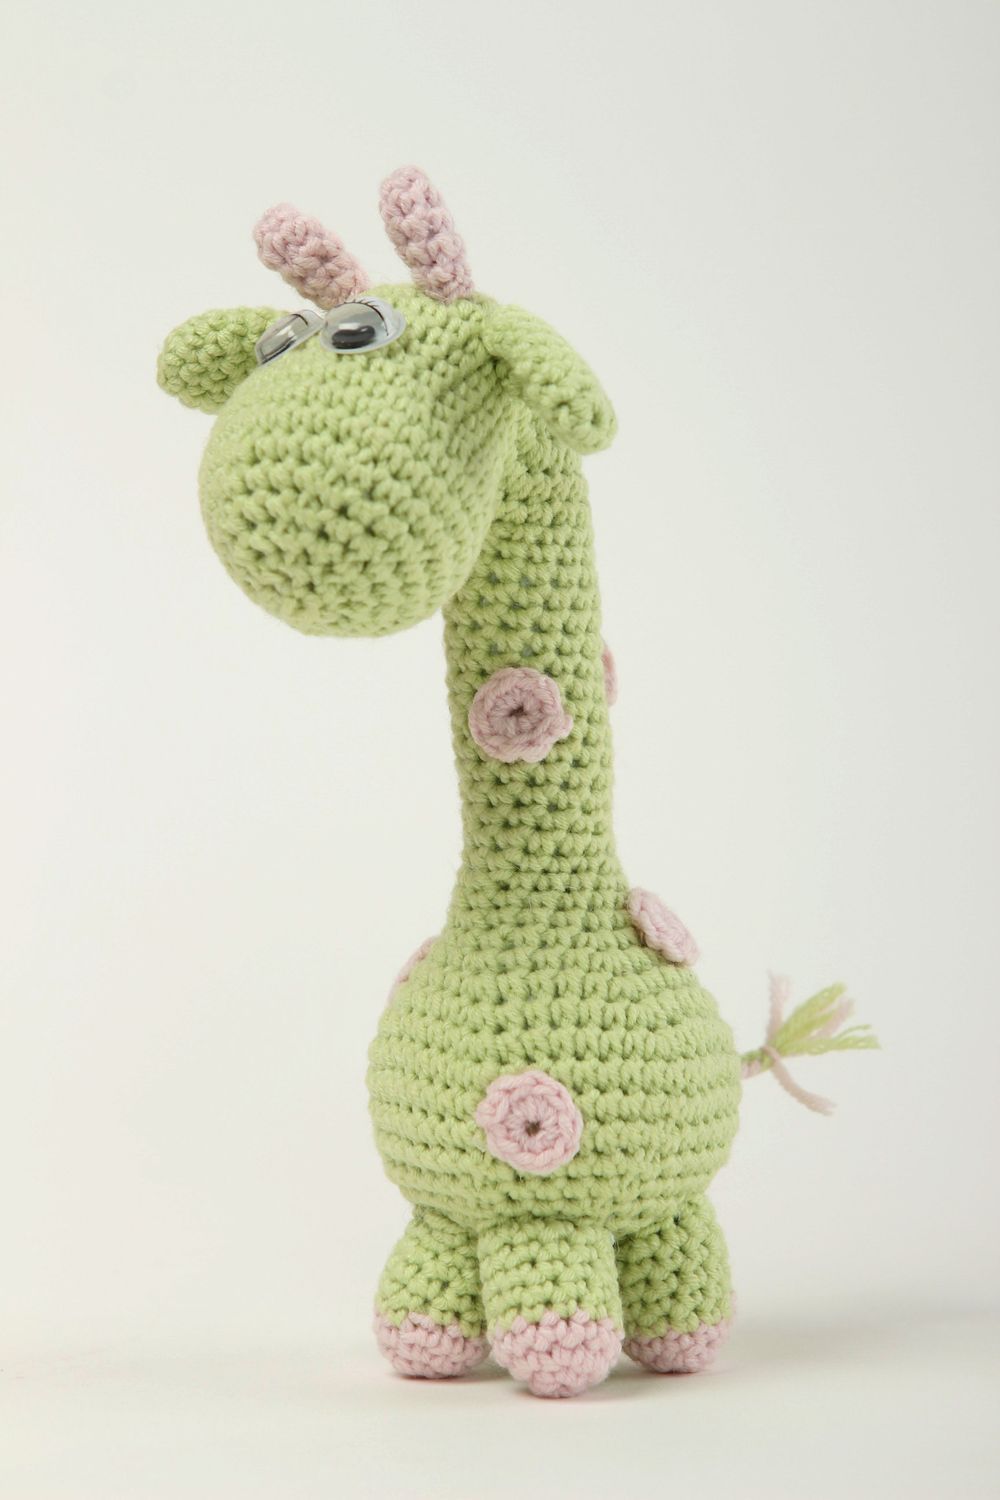 Handmade soft toy giraffe baby toy decorative crocheted toy cute toy for kids photo 2